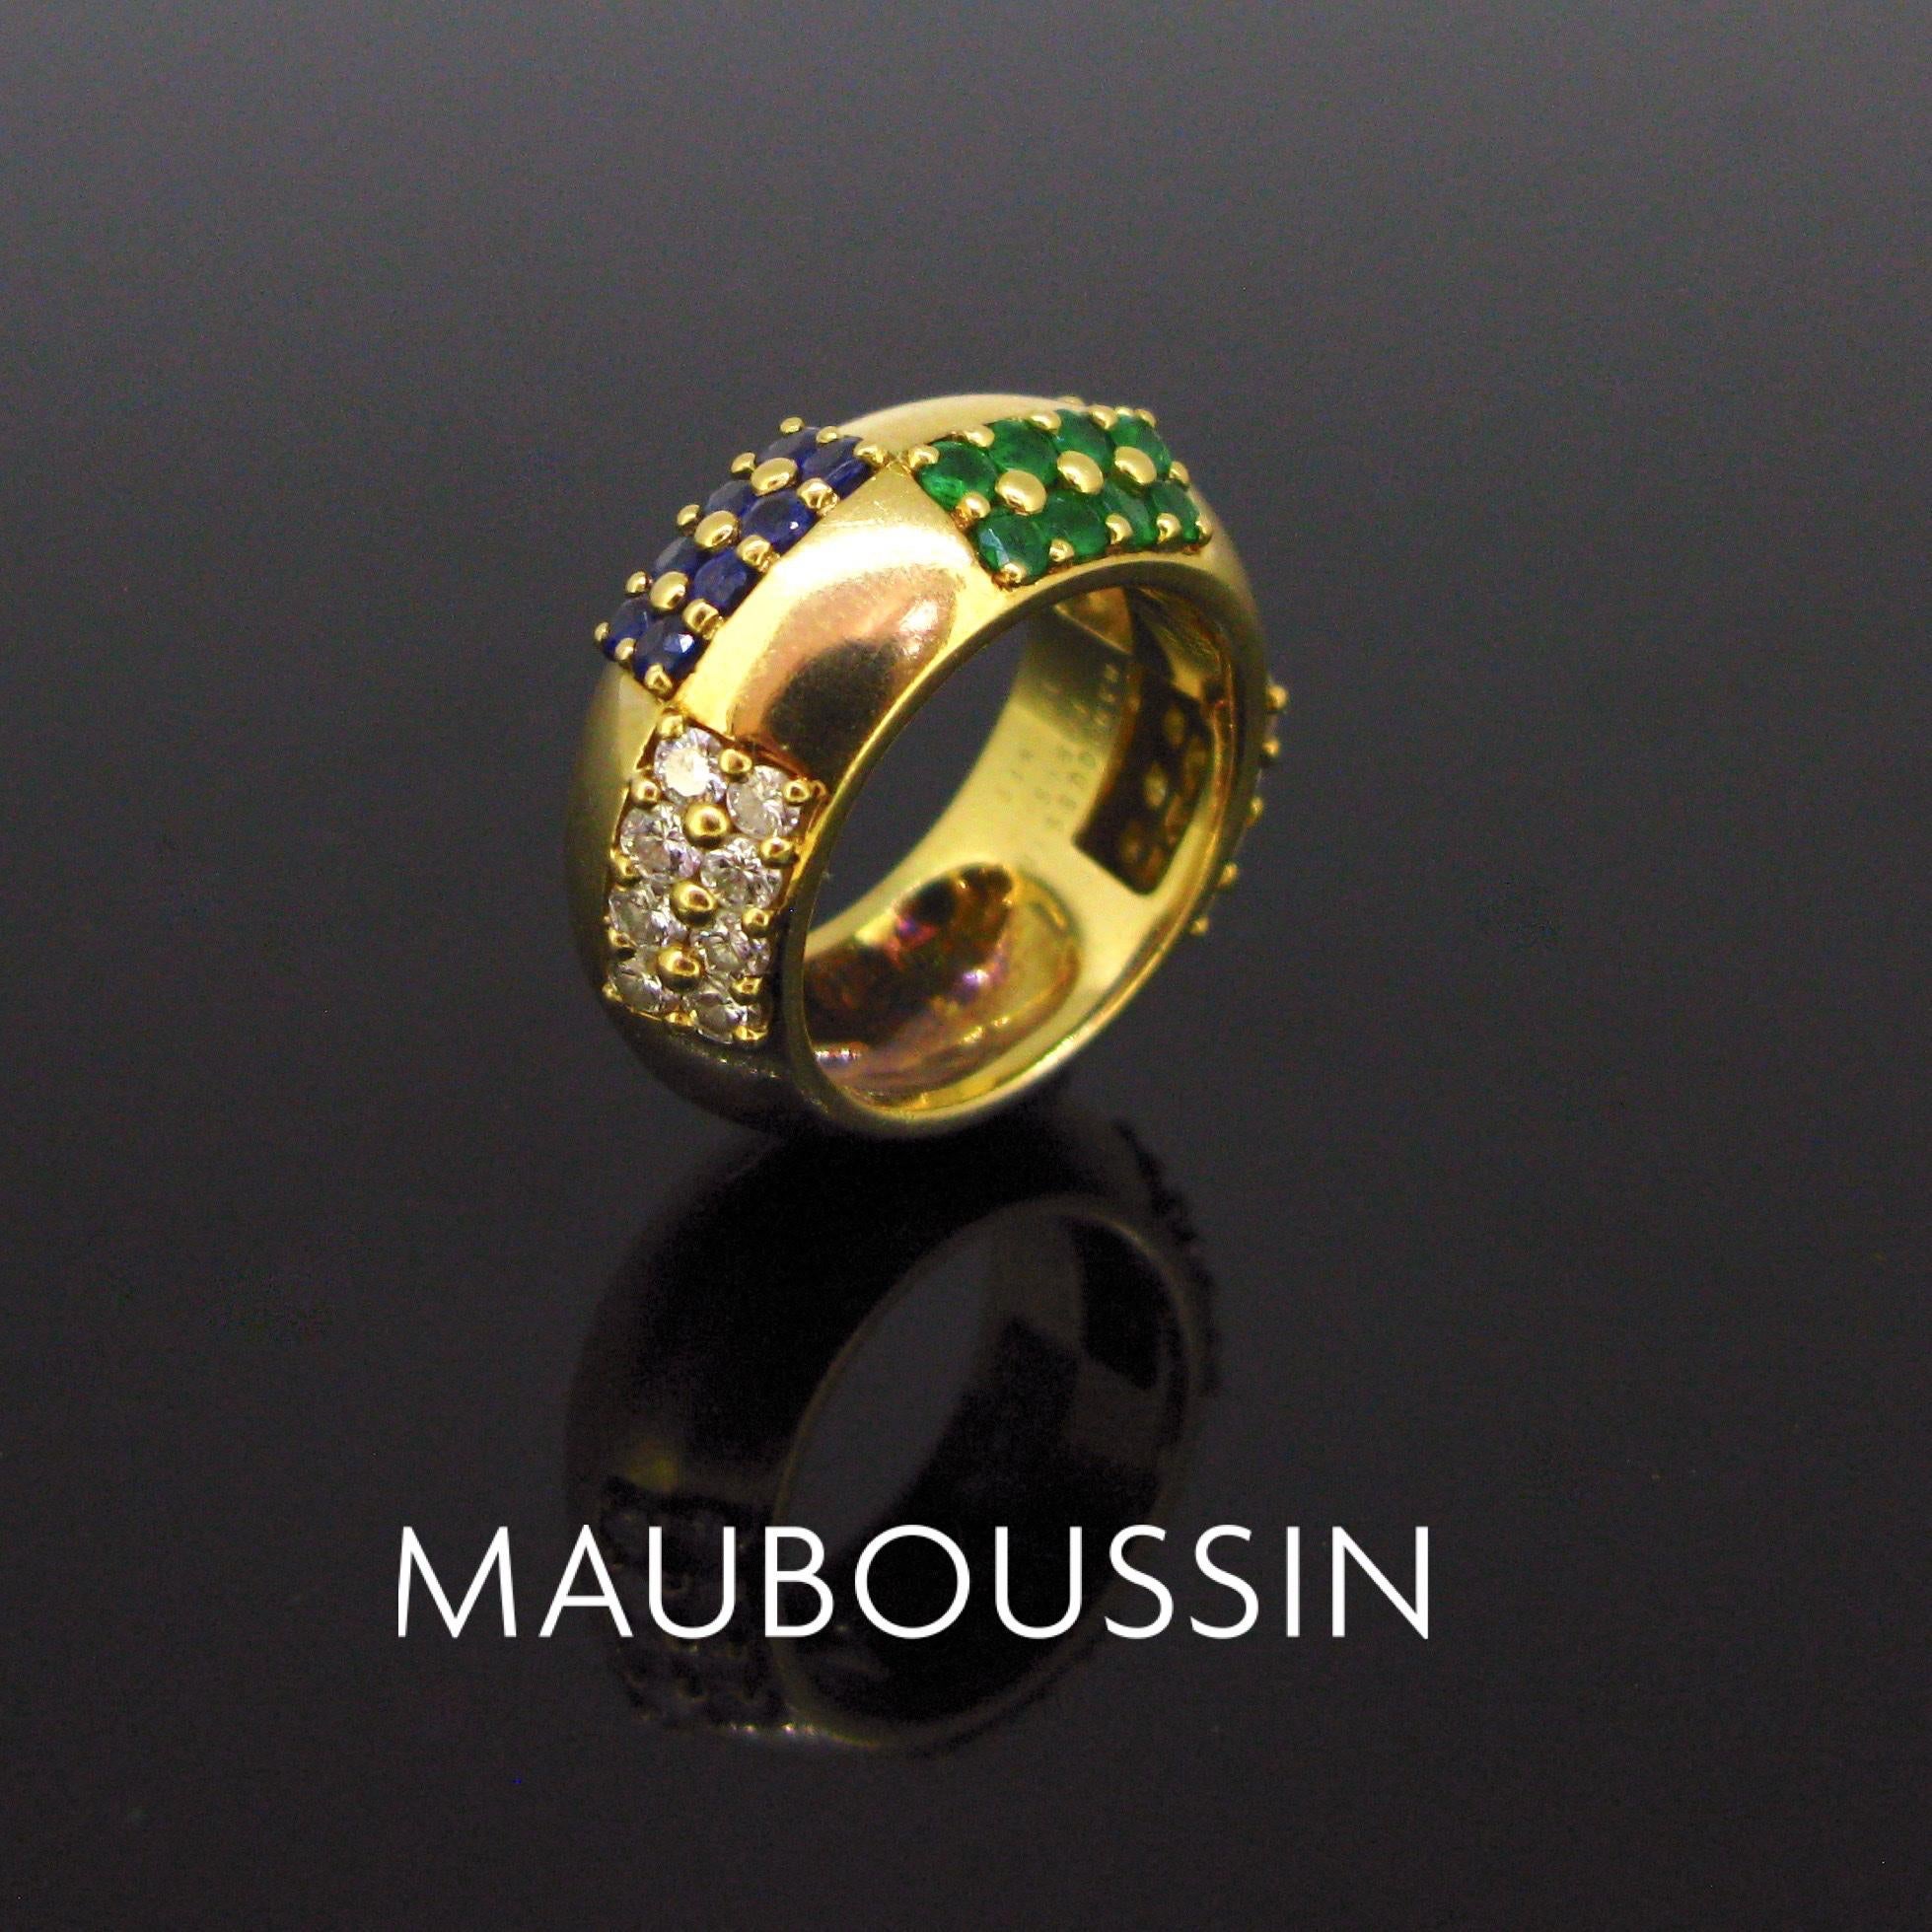 This beautiful bold band vintage ring is set with diamonds, sapphires and emeralds. The ring is made in 18kt yellow gold and it is in good vintage condition. It is signed Mauboussin inside the band and marked with the French eagle’s head. Ring size: